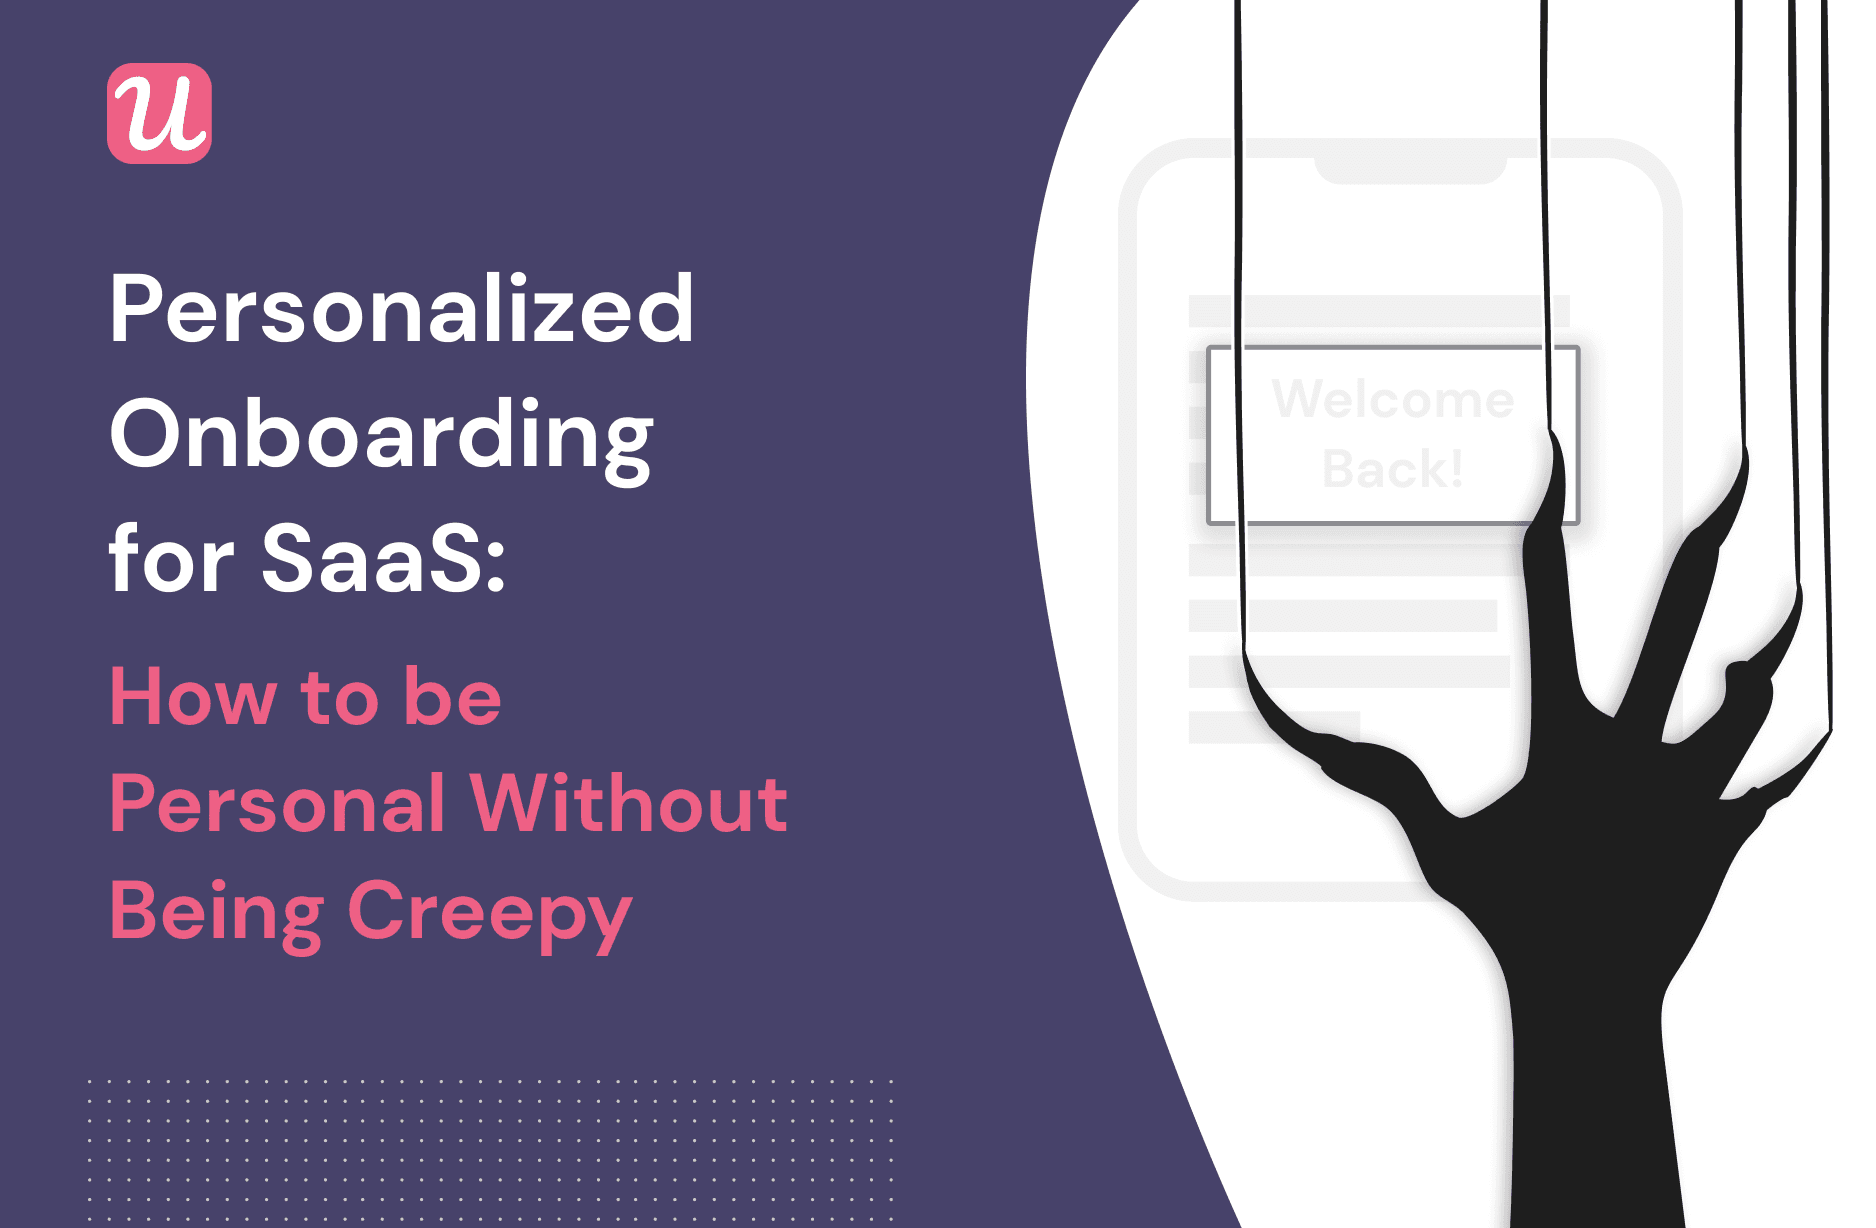 Personalized Onboarding for SaaS: How to be Personal Without Being Creepy